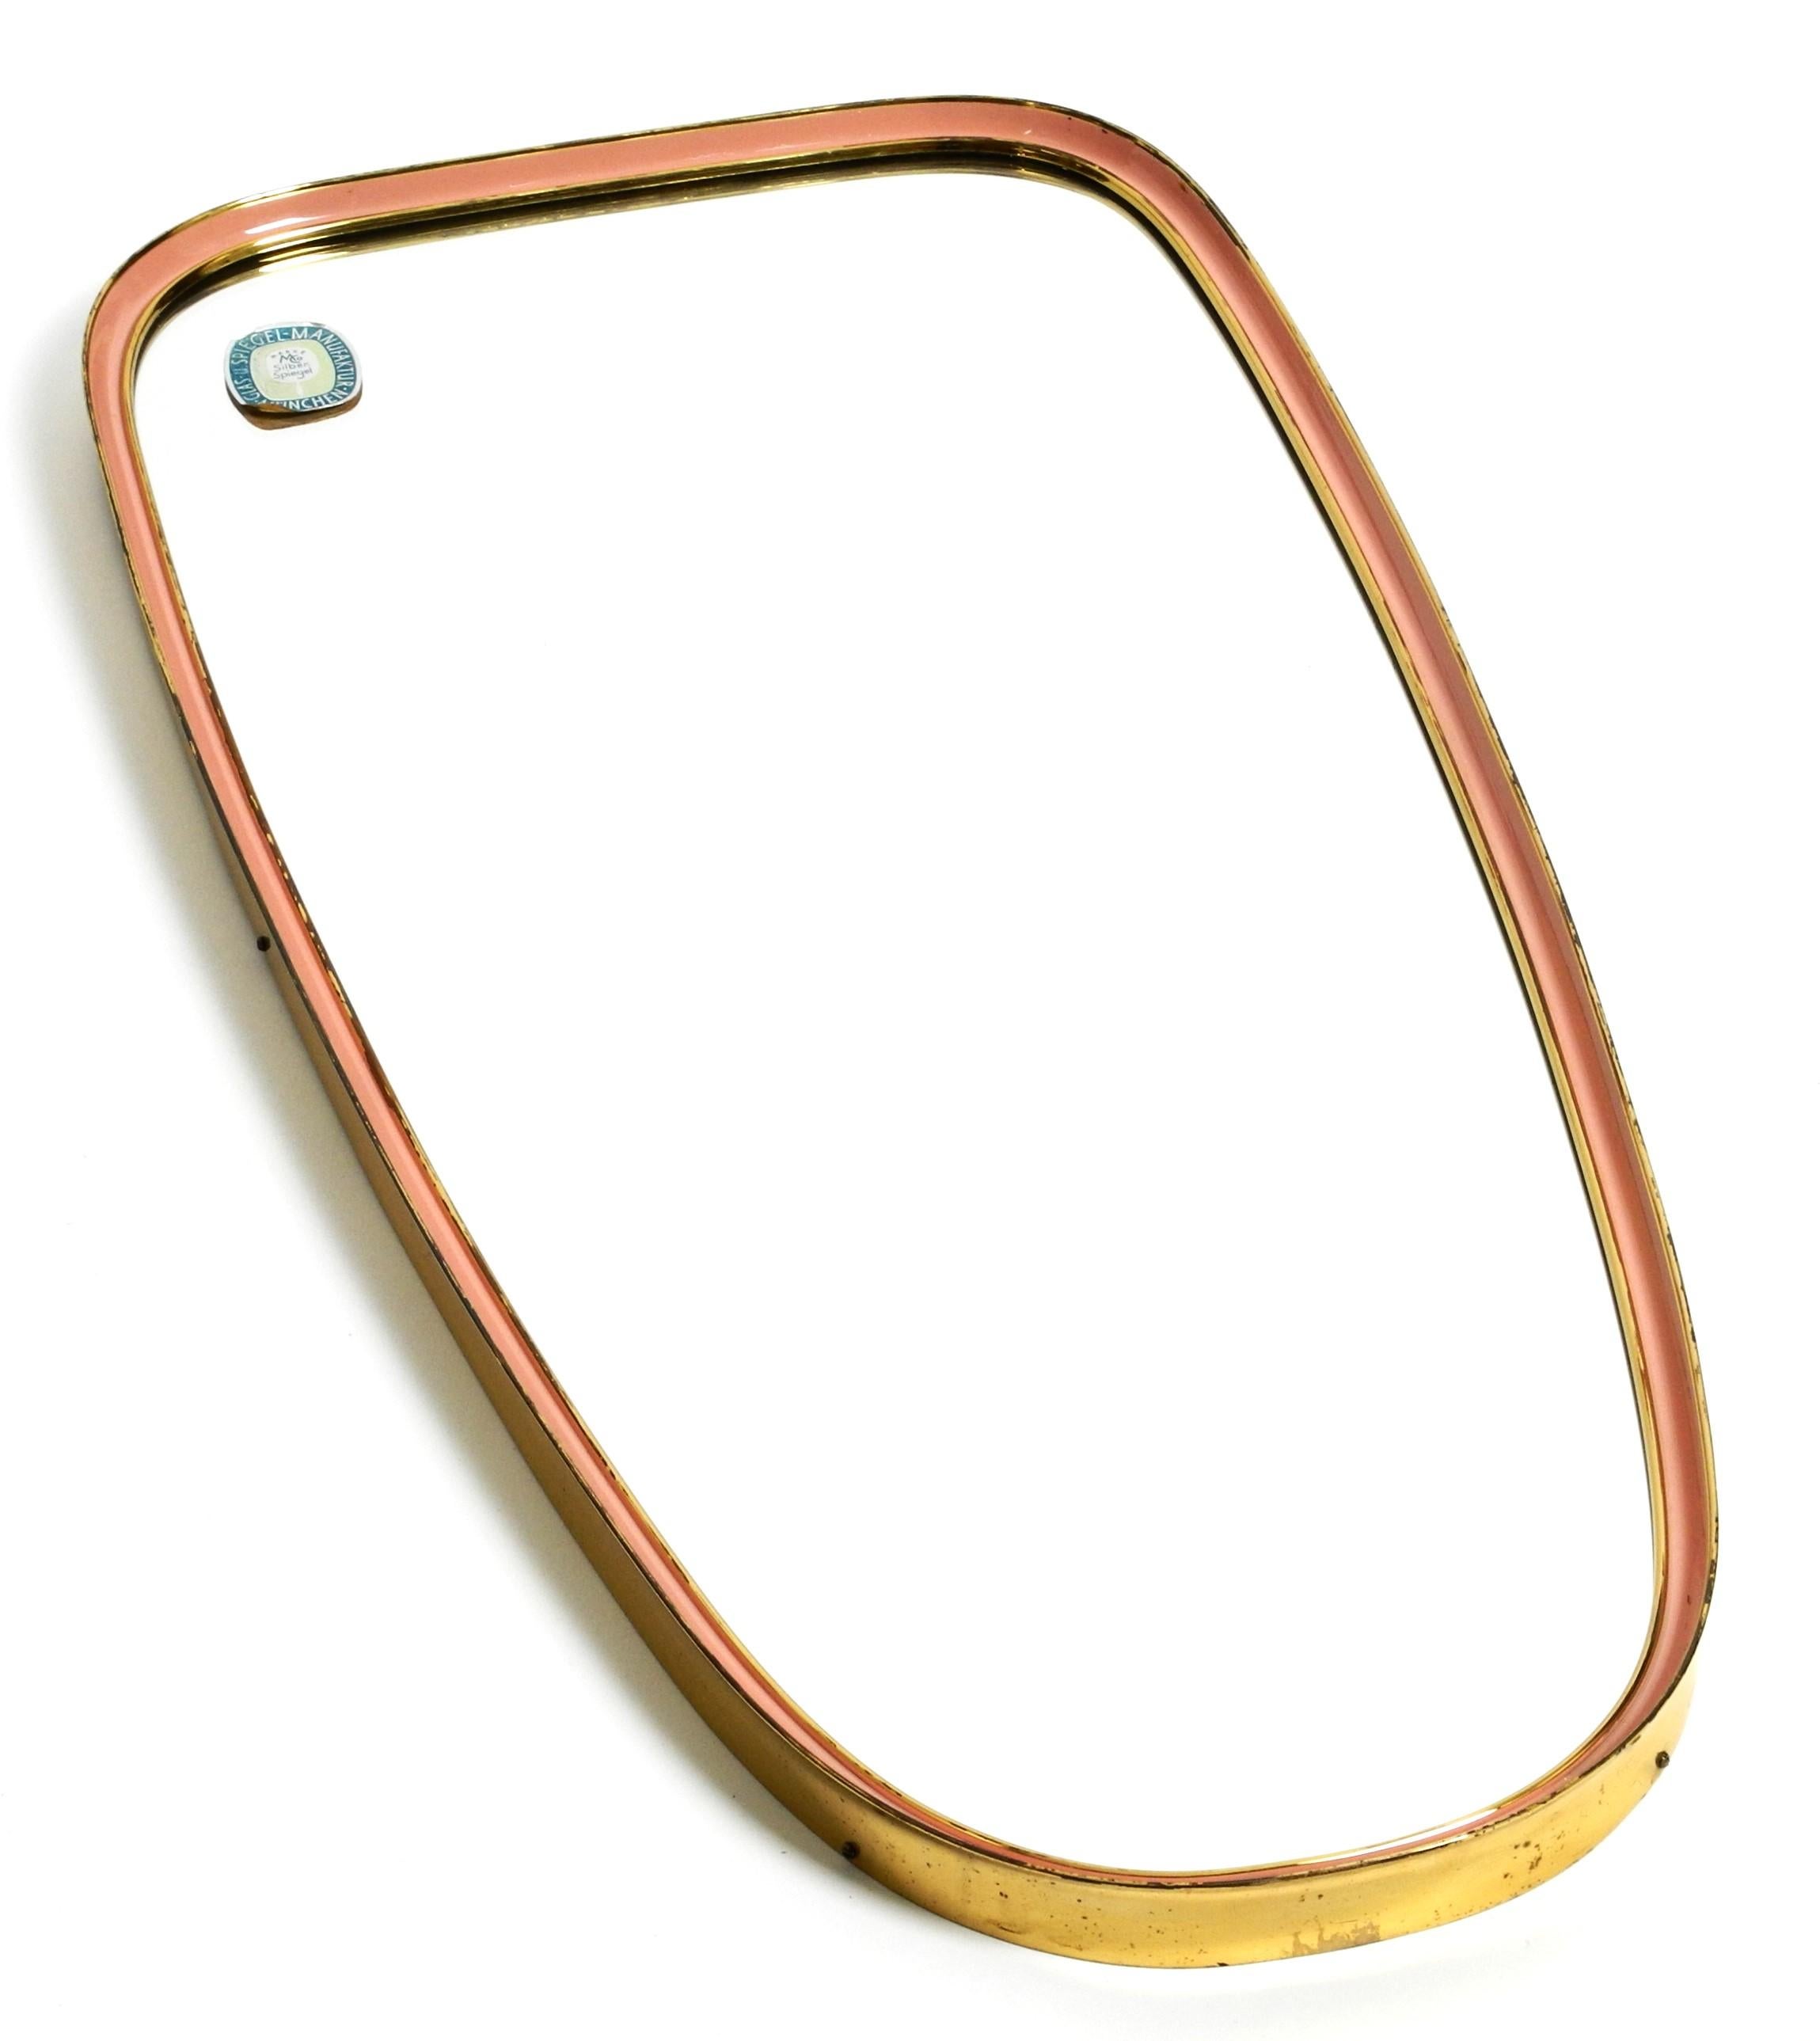 Mid-20th Century Mid-Century Modern Brass Wall Mirror by Silberspiegel, Germany 1950s For Sale